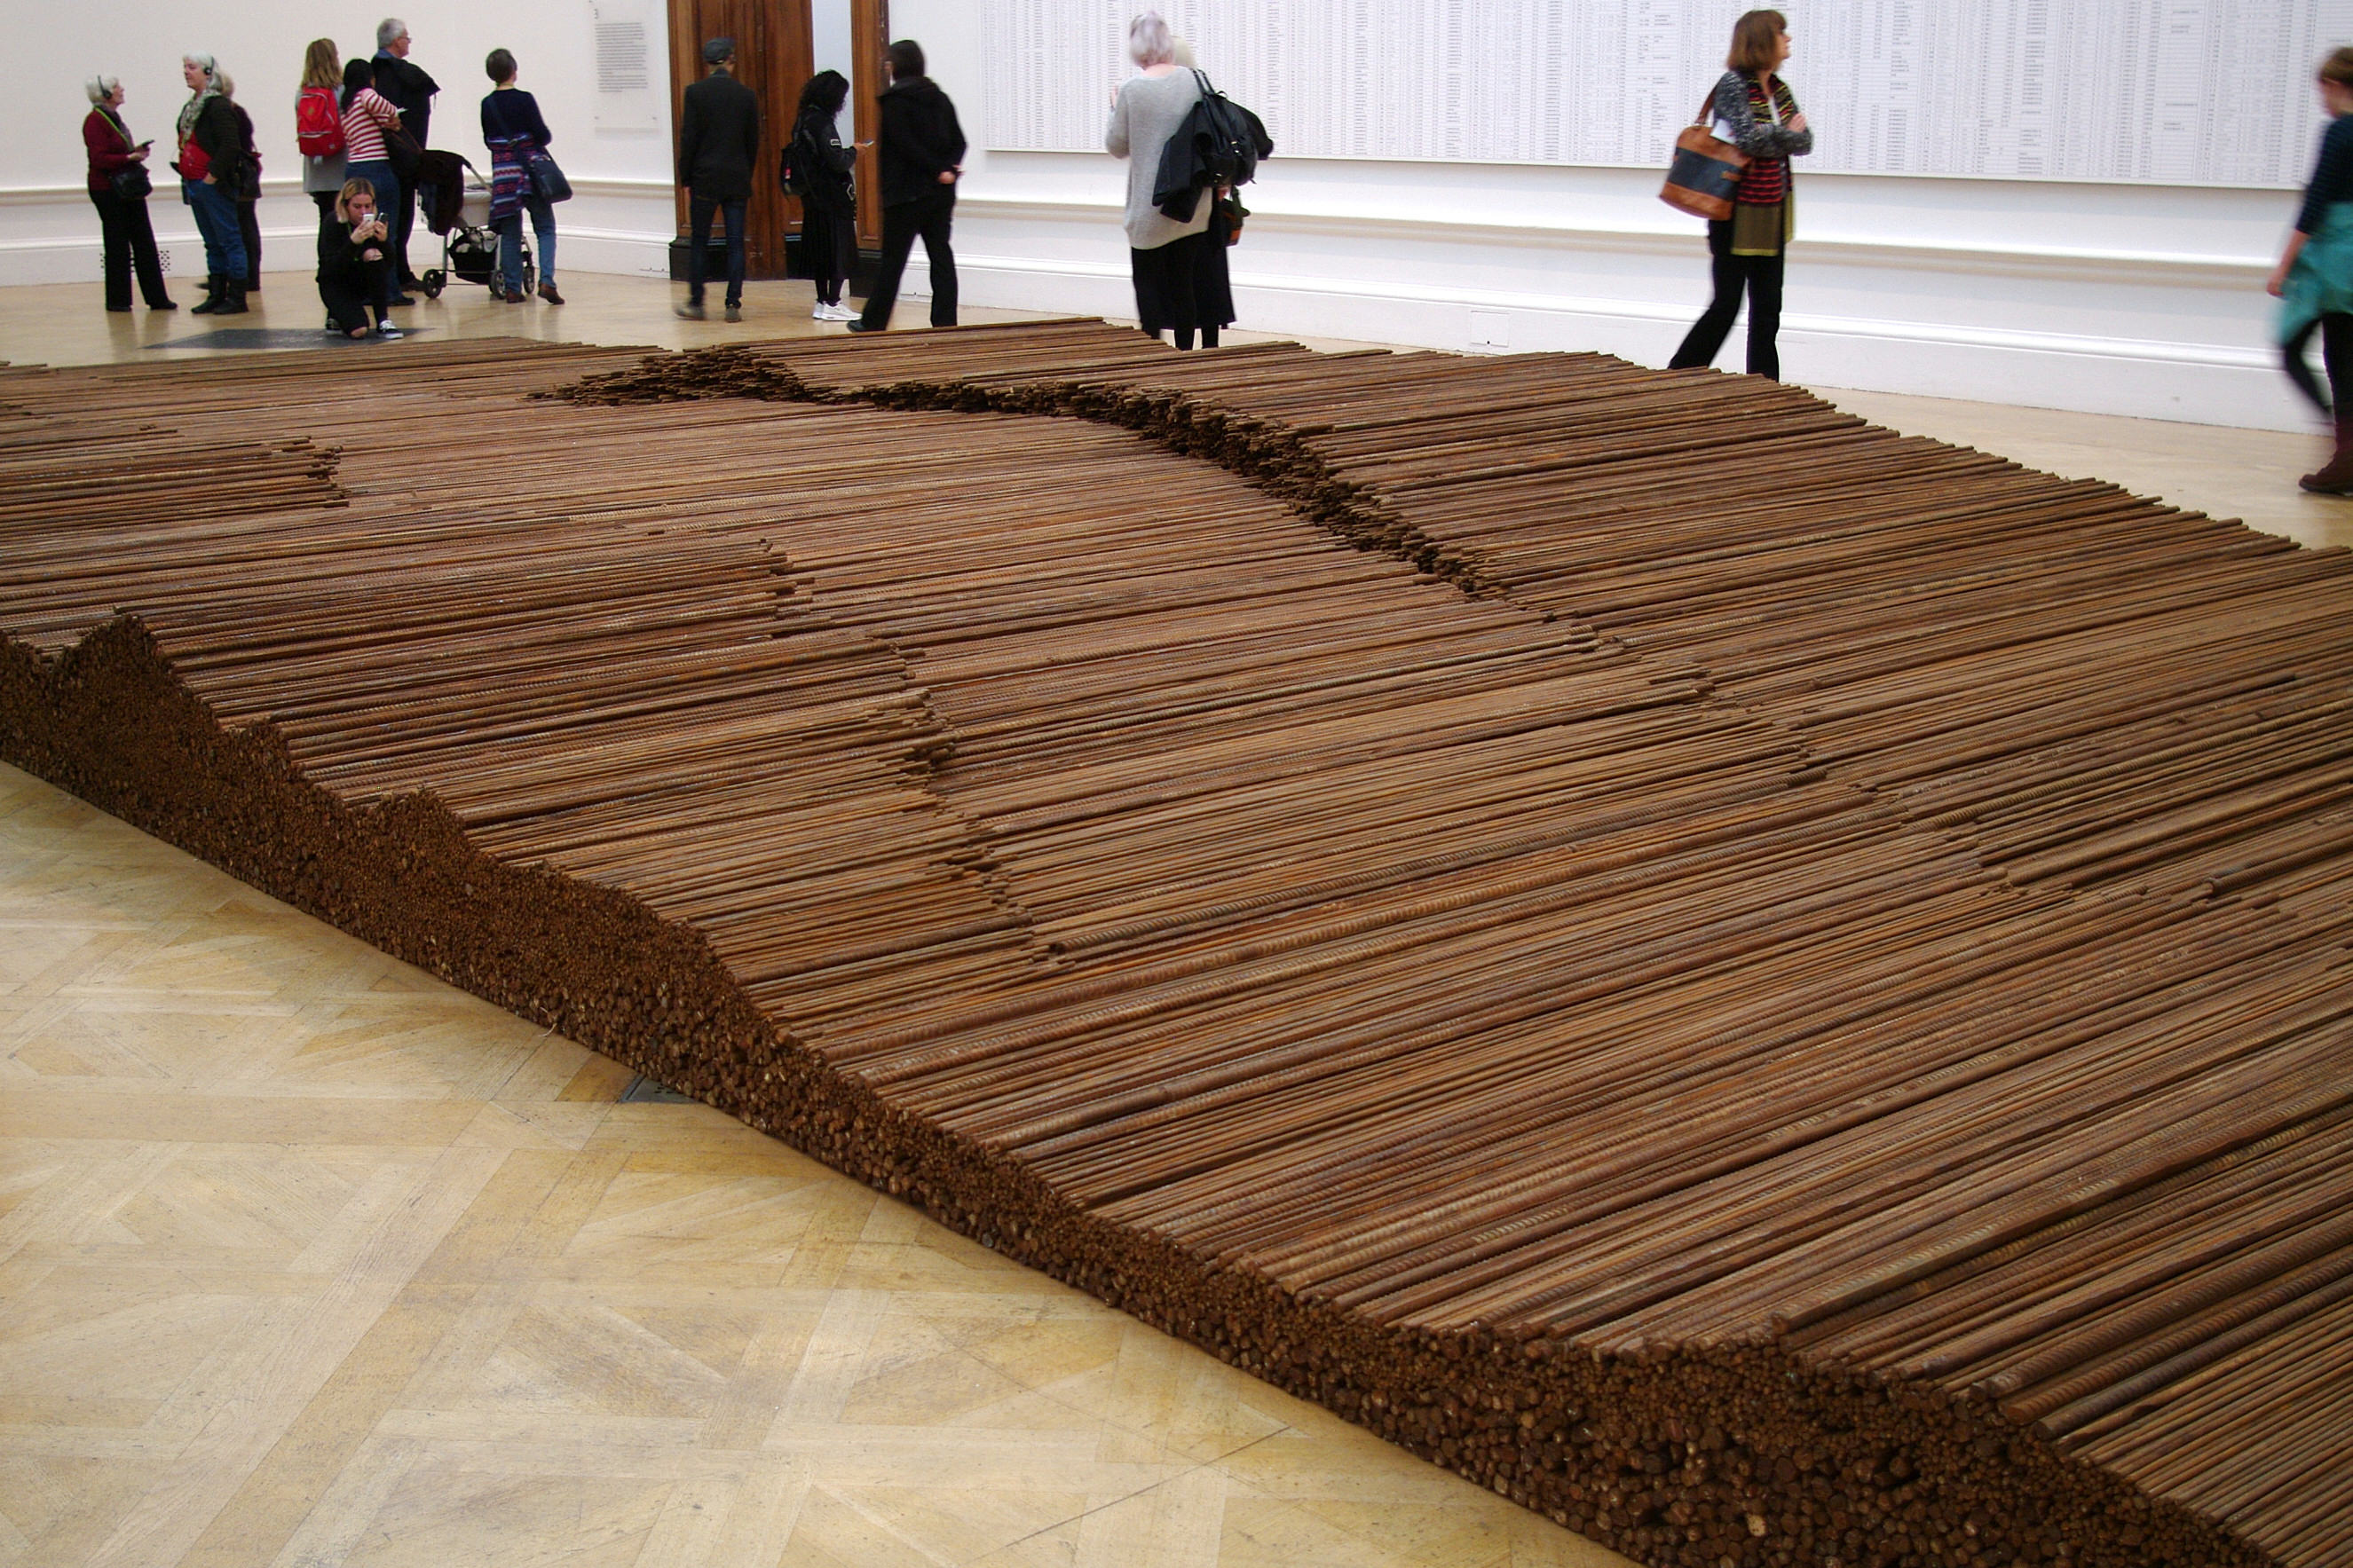 Straight Art Piece containing steel rods from buildings destroyed by the Sichuan earthquake